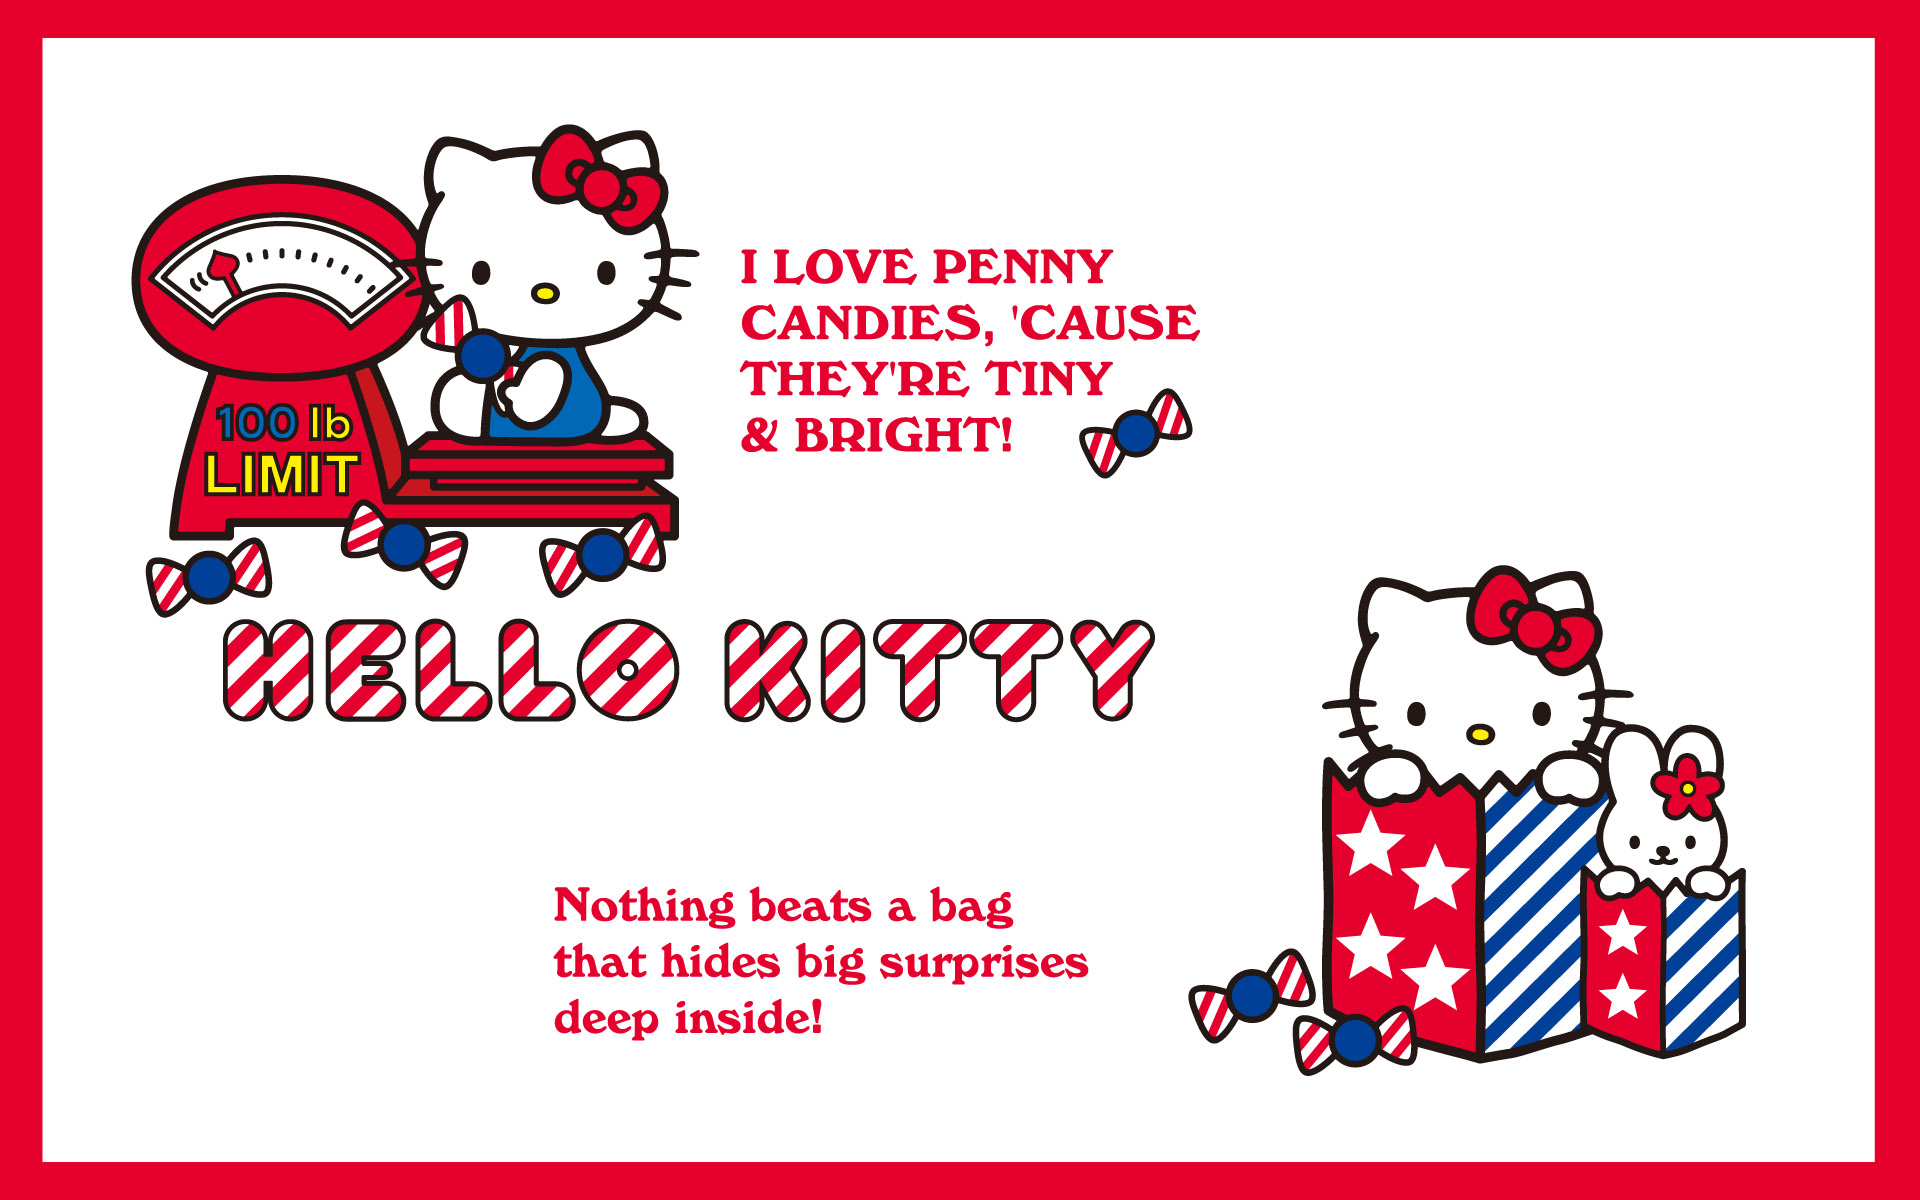 Kitty Hello Candies Penny Love Wallpaper